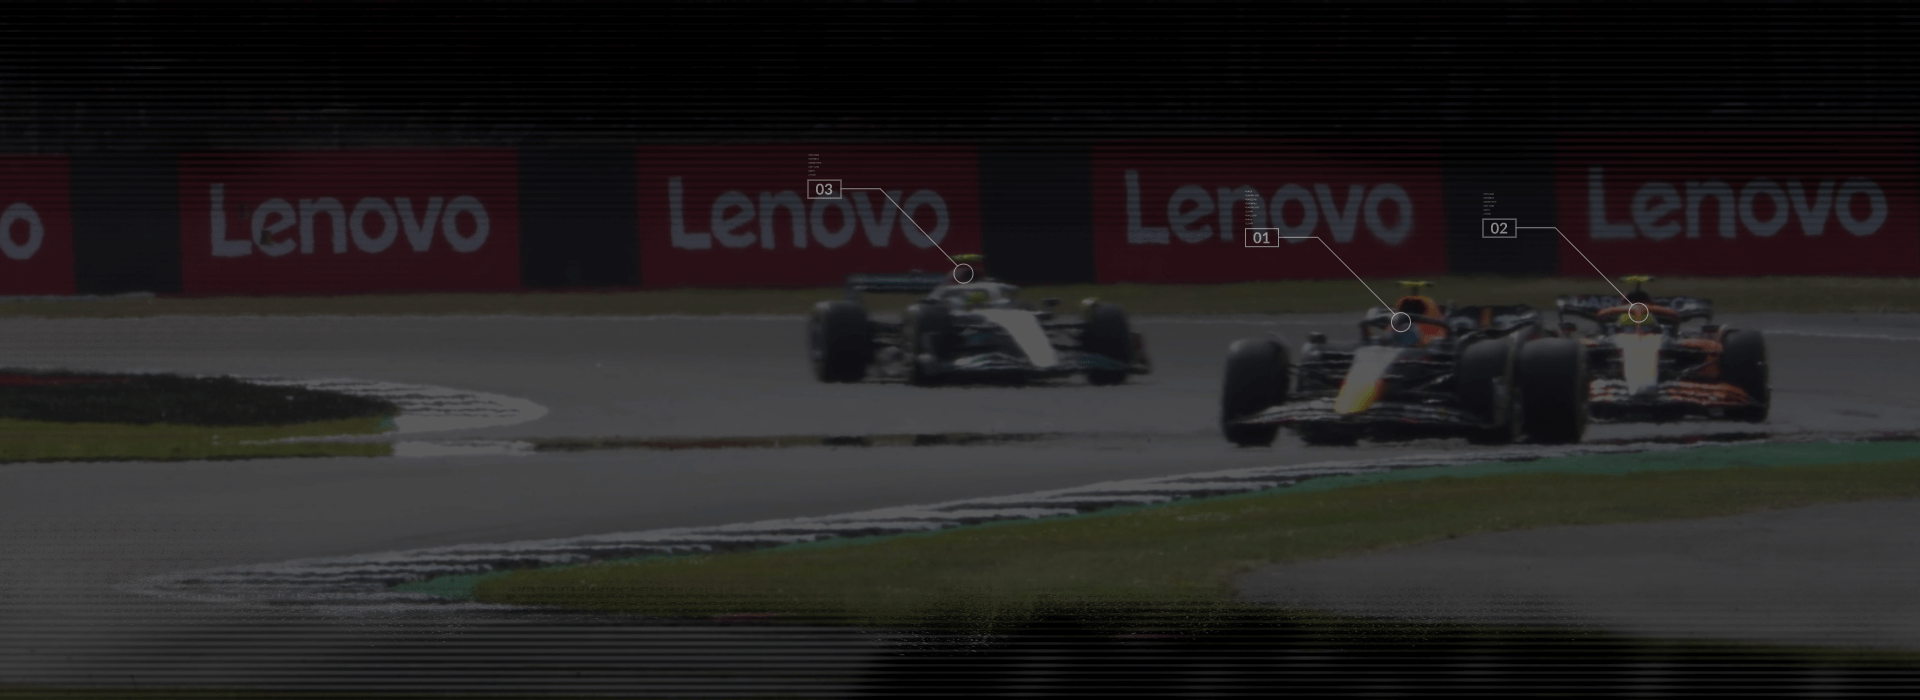 3 F1 cars on a race track with Lenovo banners in the background